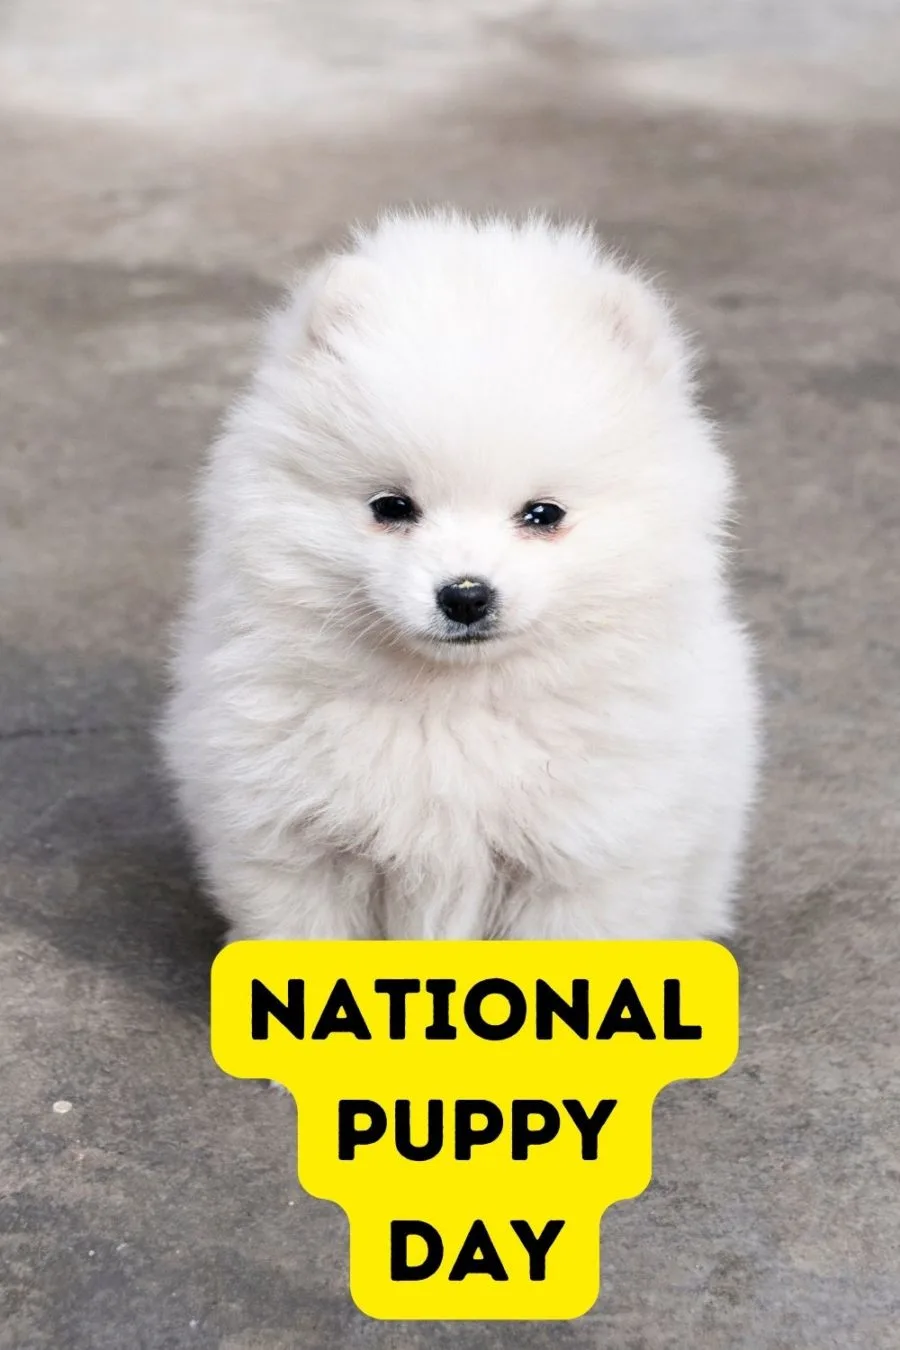 National Puppy Day is held on March 23.